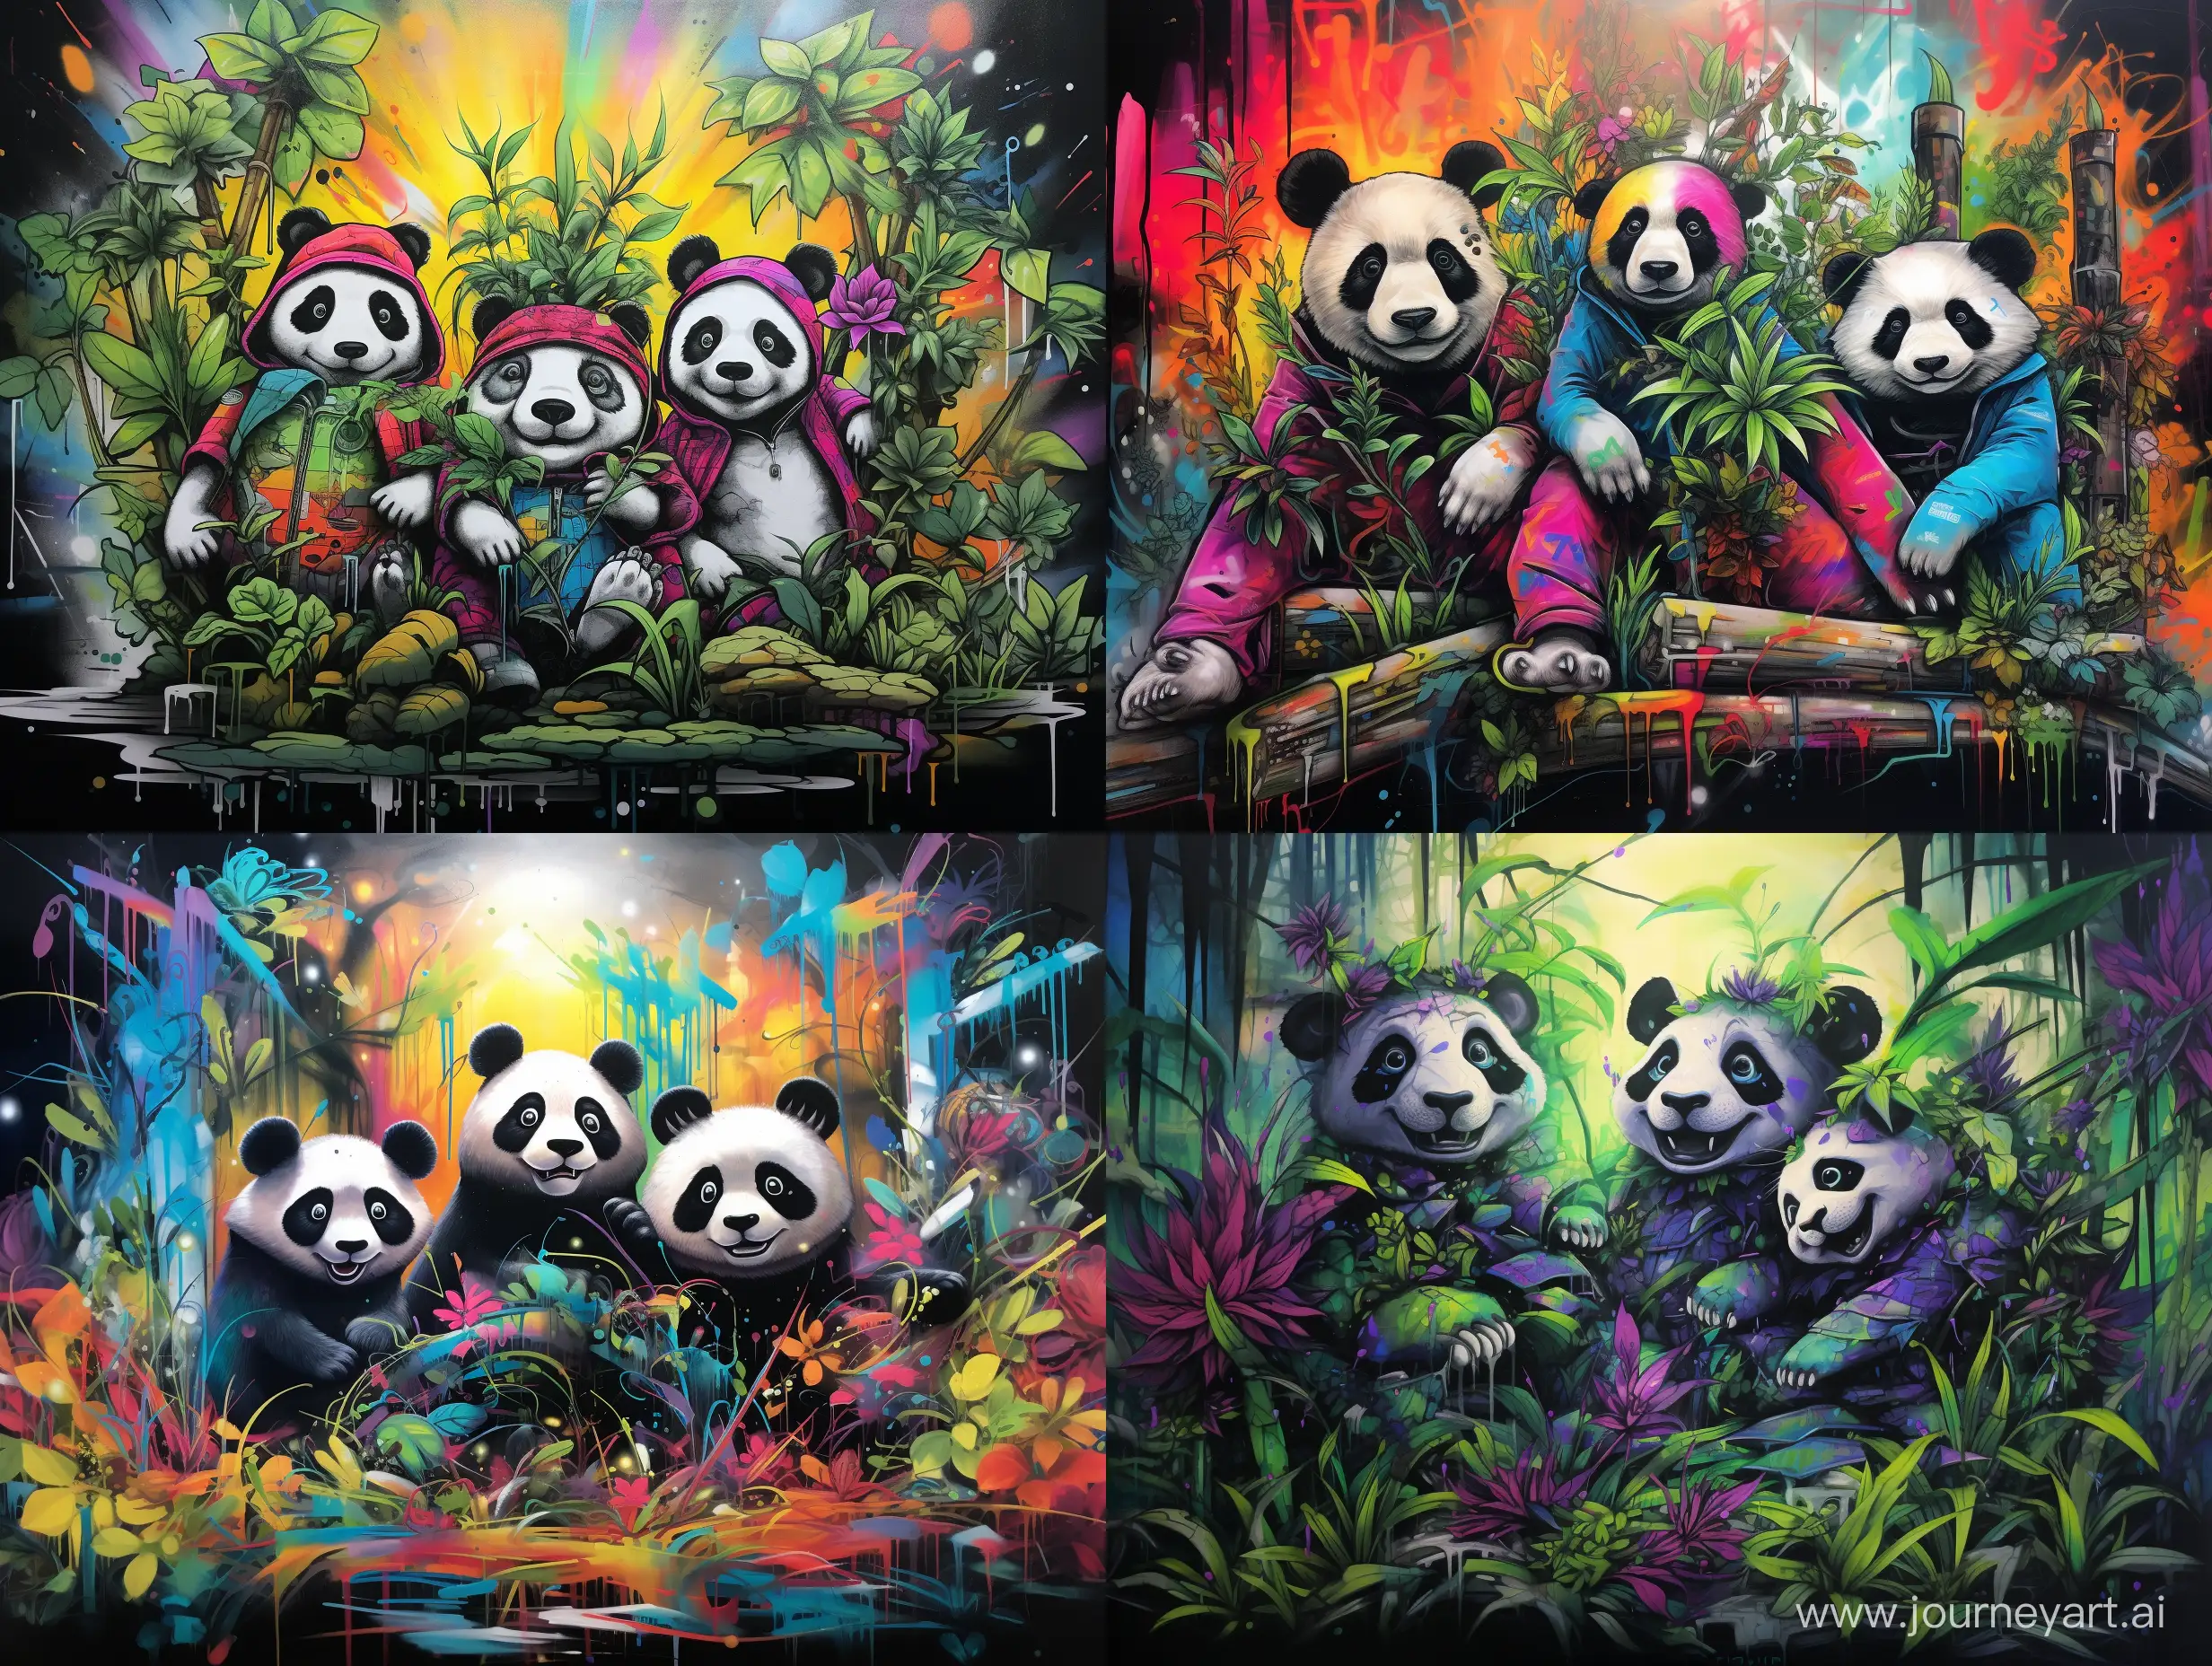 Four-Playful-Pandas-Surrounded-by-Bamboo-and-Graffiti-Art